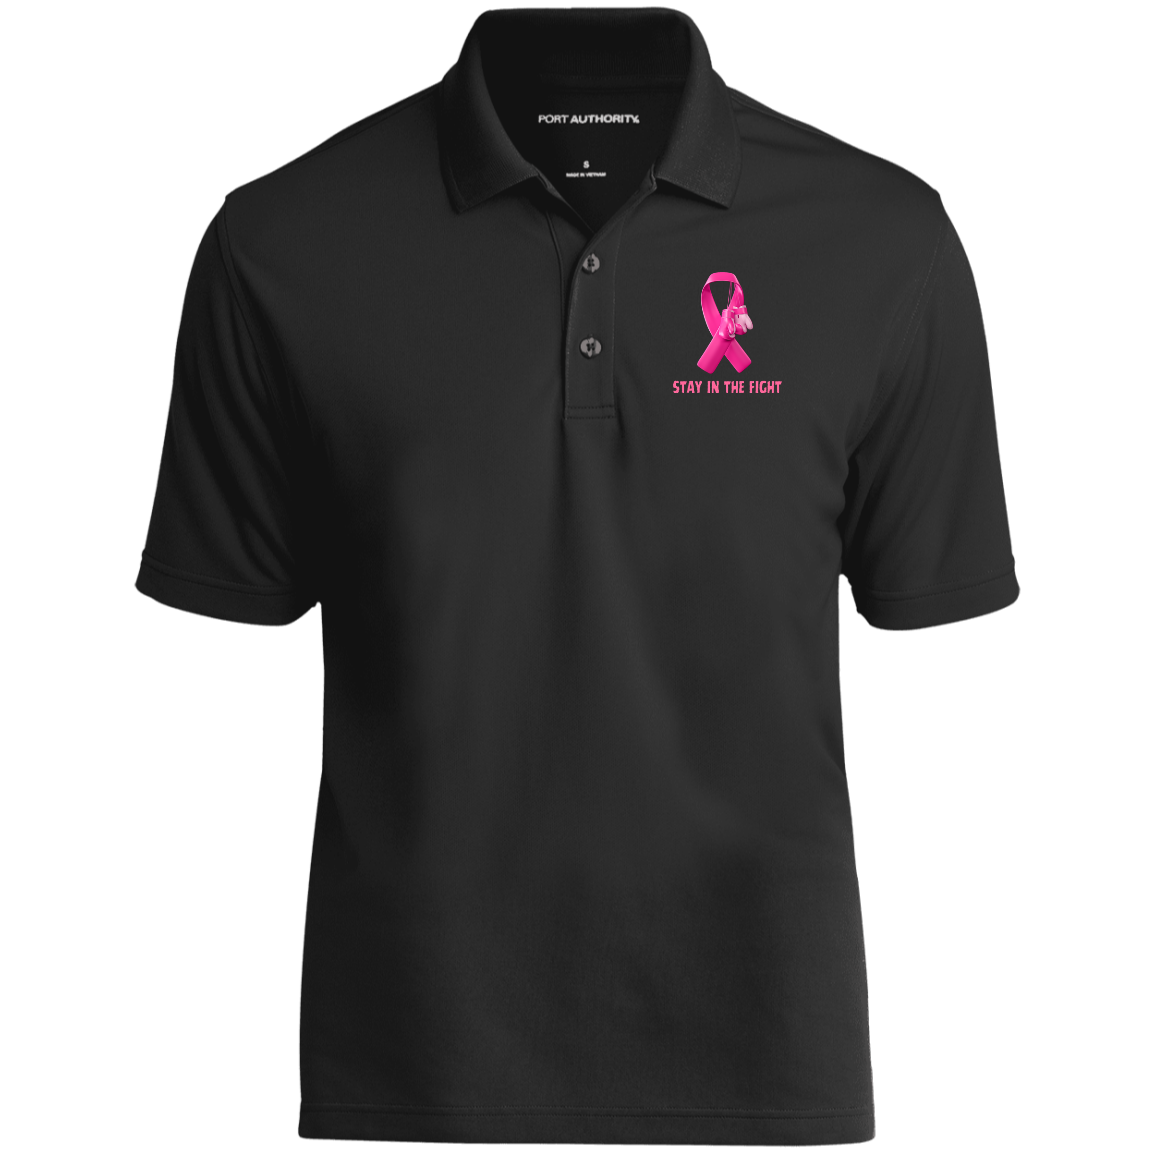 Stay in the Fight Short Sleeve Polo